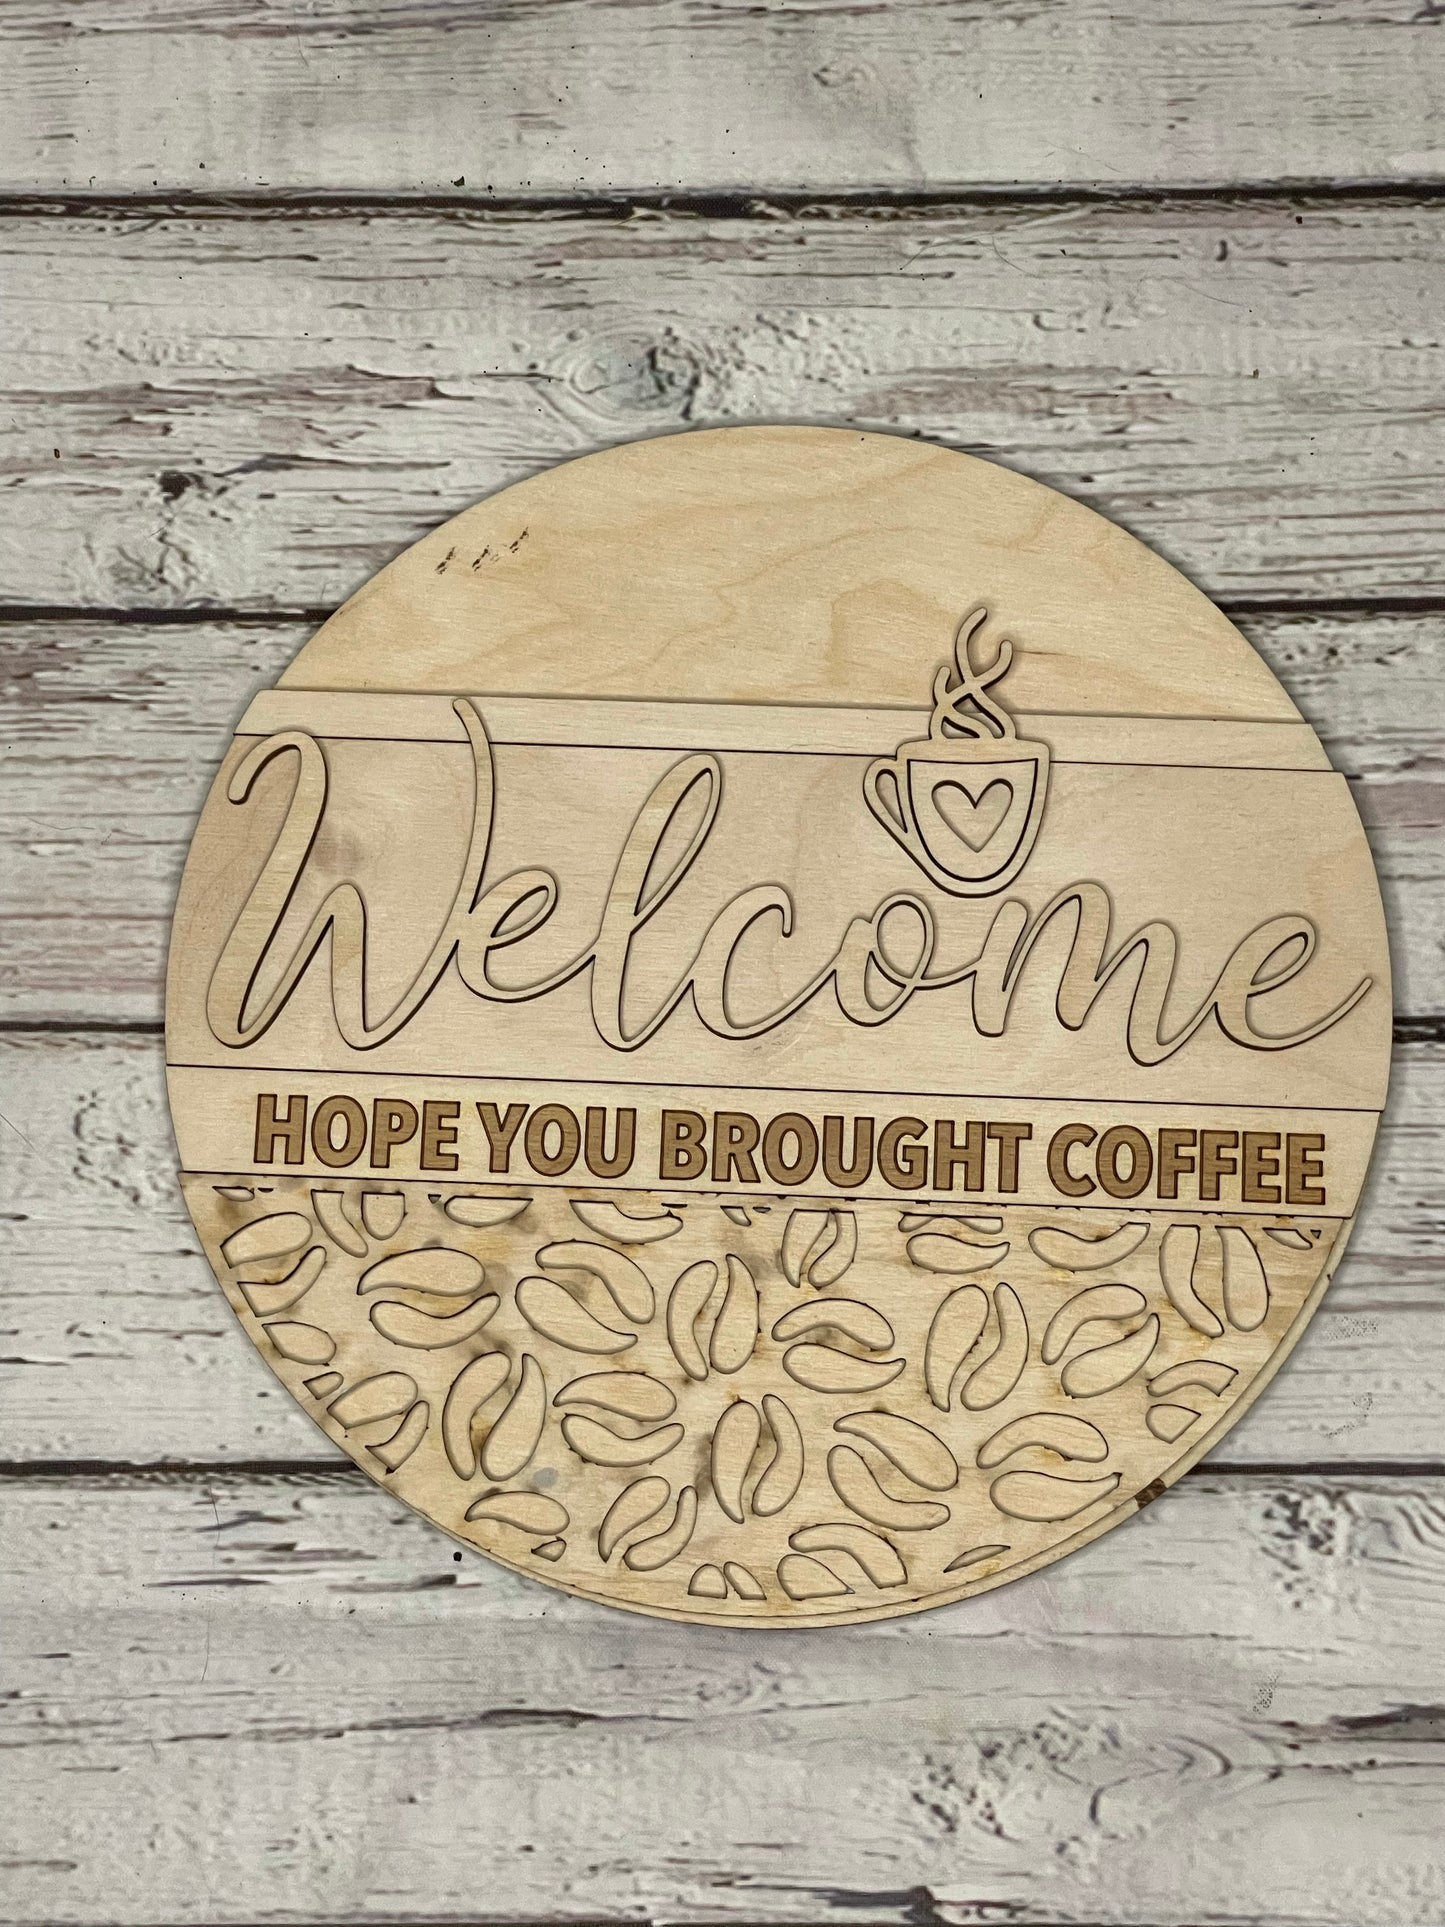 Welcome - brought coffee blank